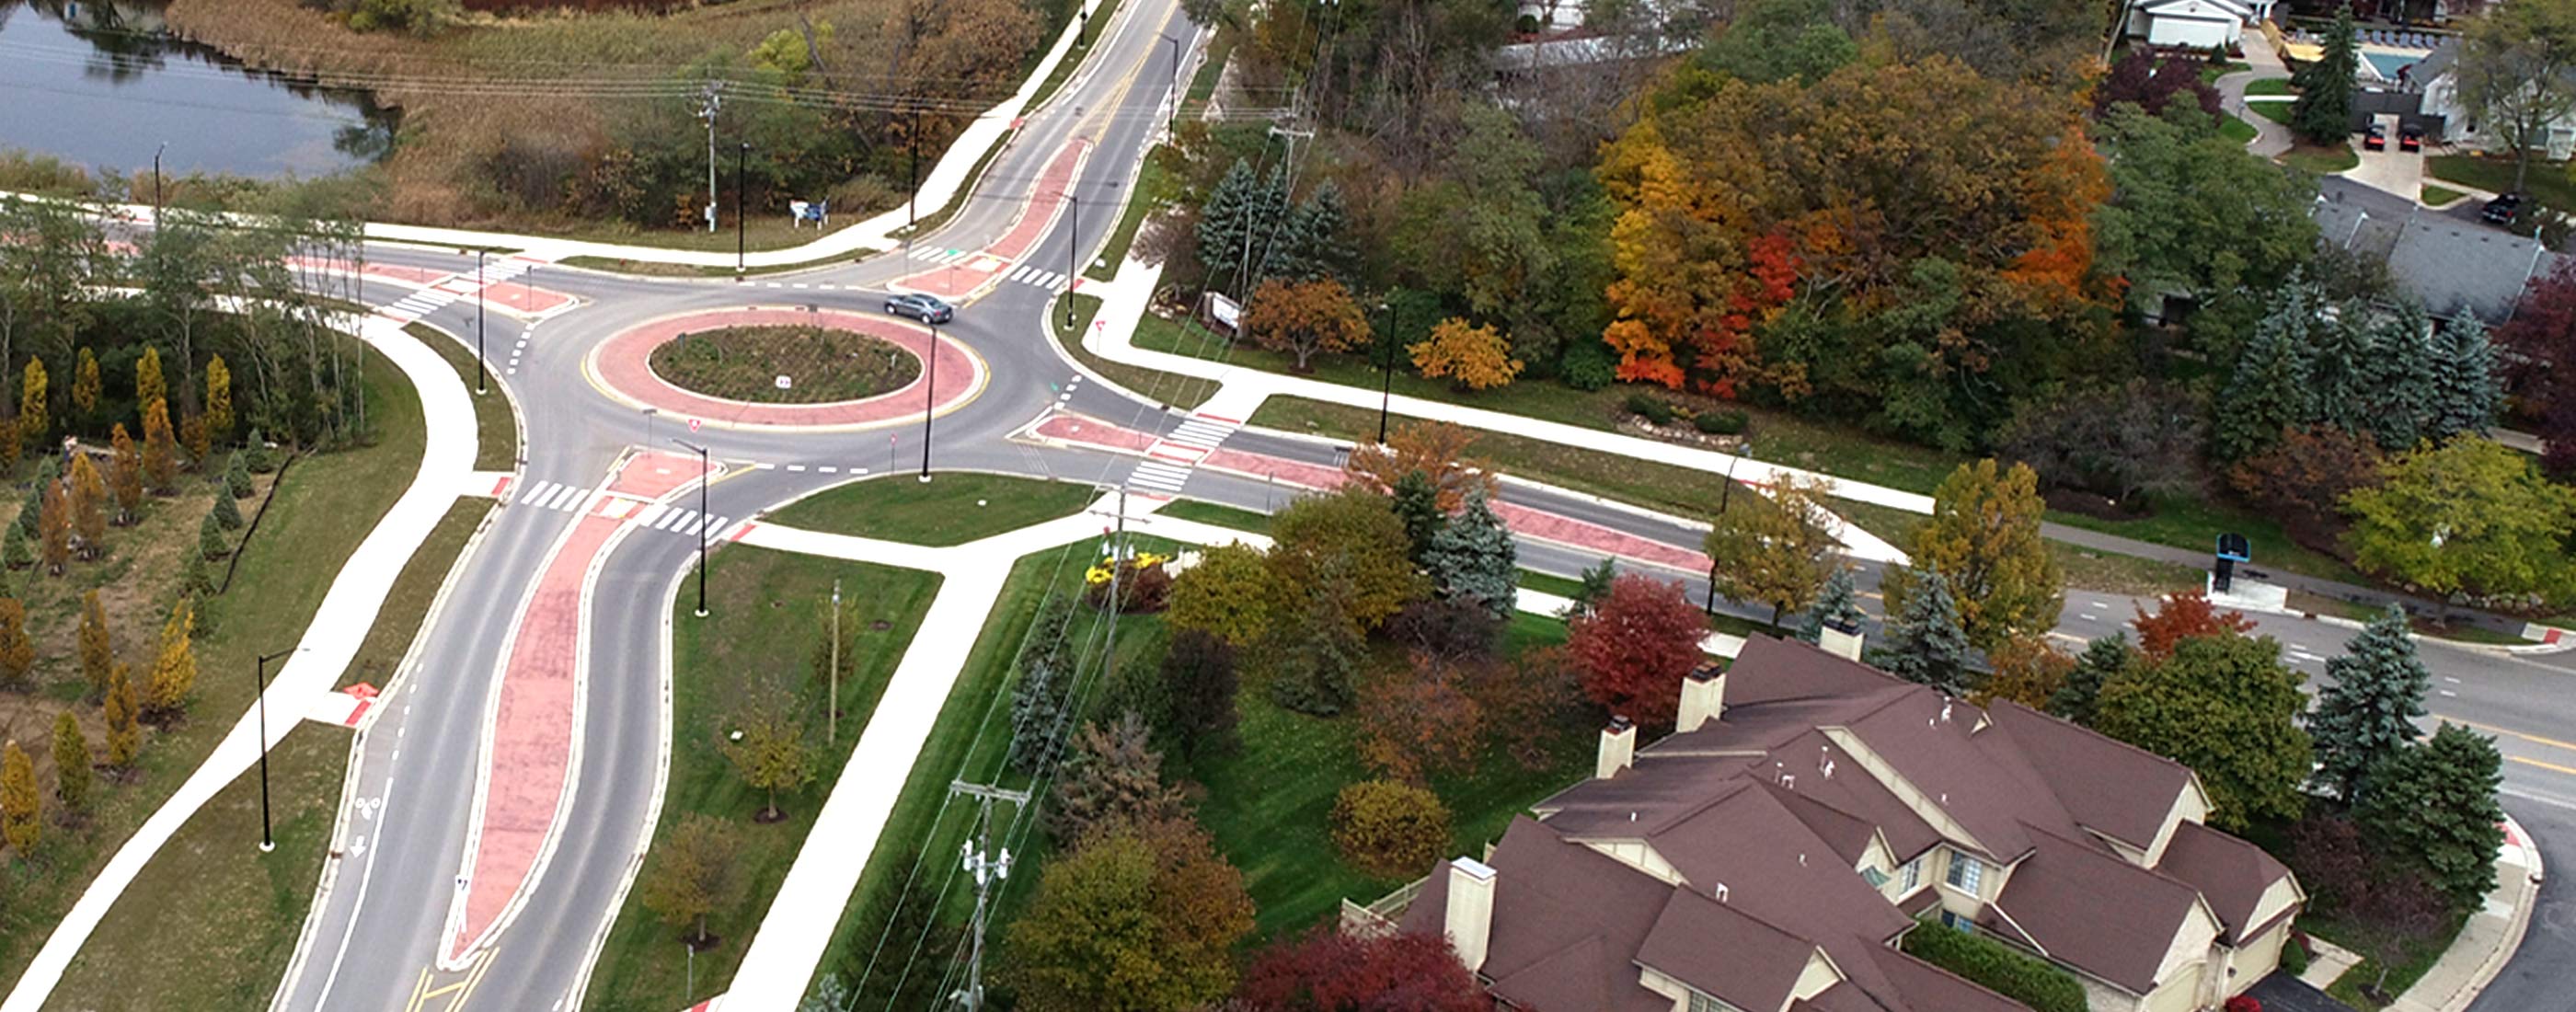 OHM Advisors completed a roundabout design at the highly-traveled intersections of Nixon, Green and Dhu Varren roads.